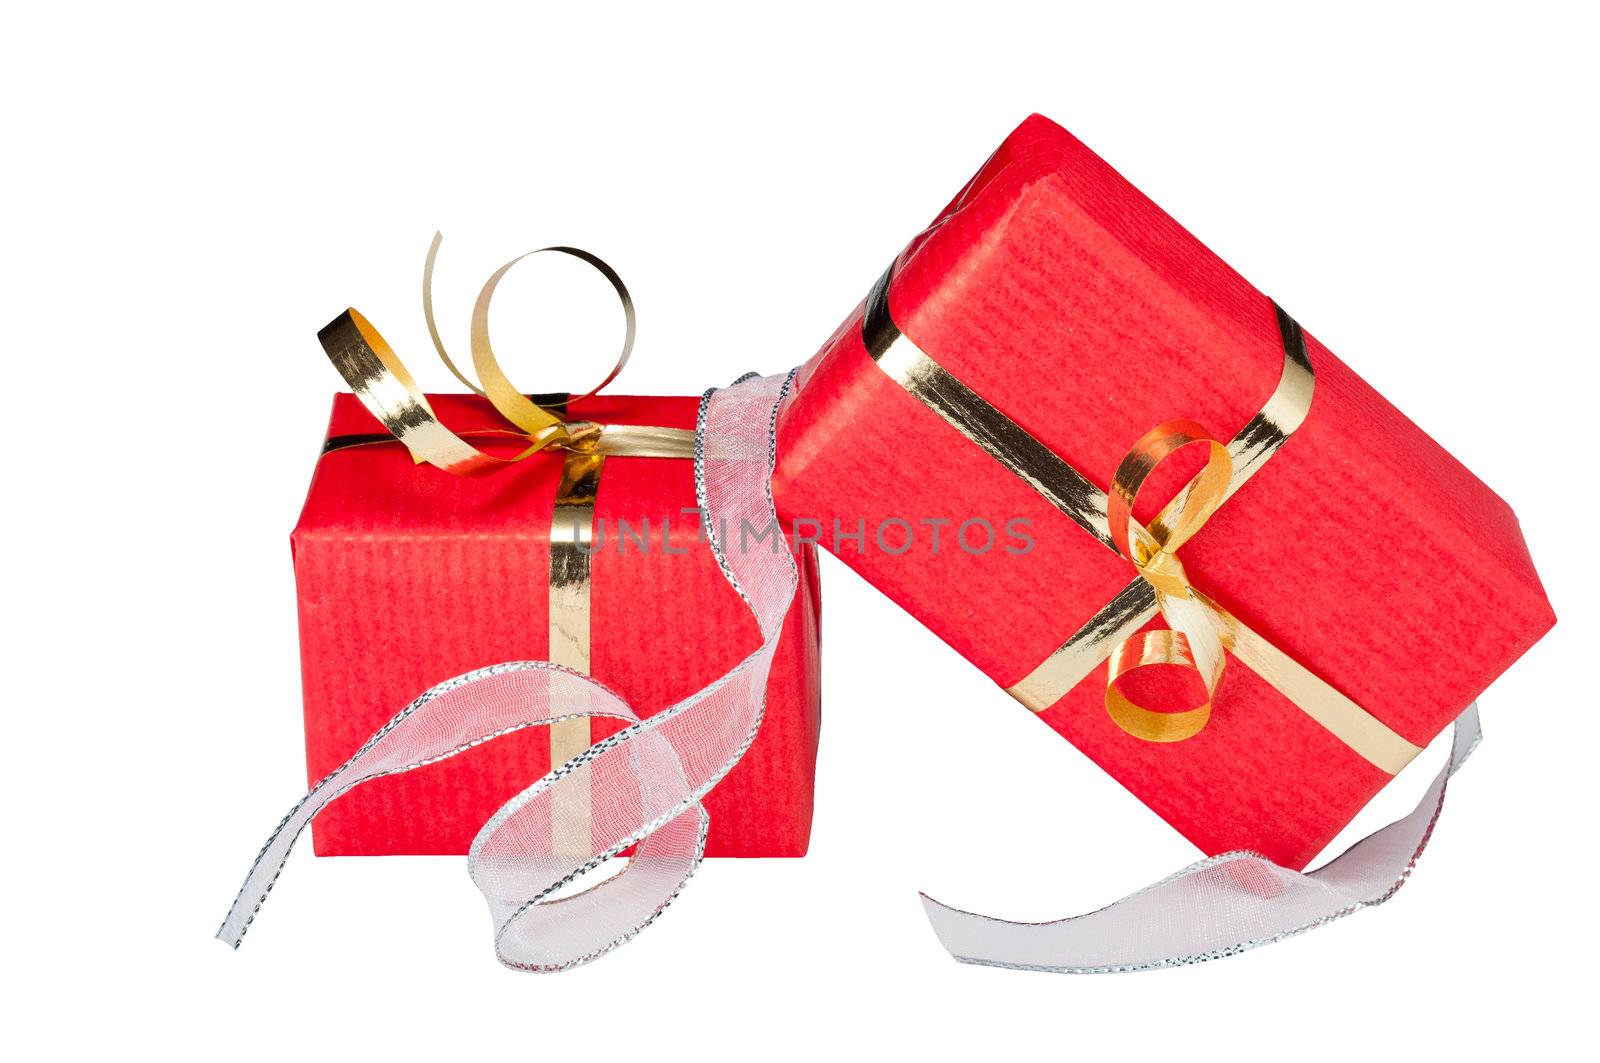 Two red and gold gift boxes with a flowing silver ribbon, isolated on white